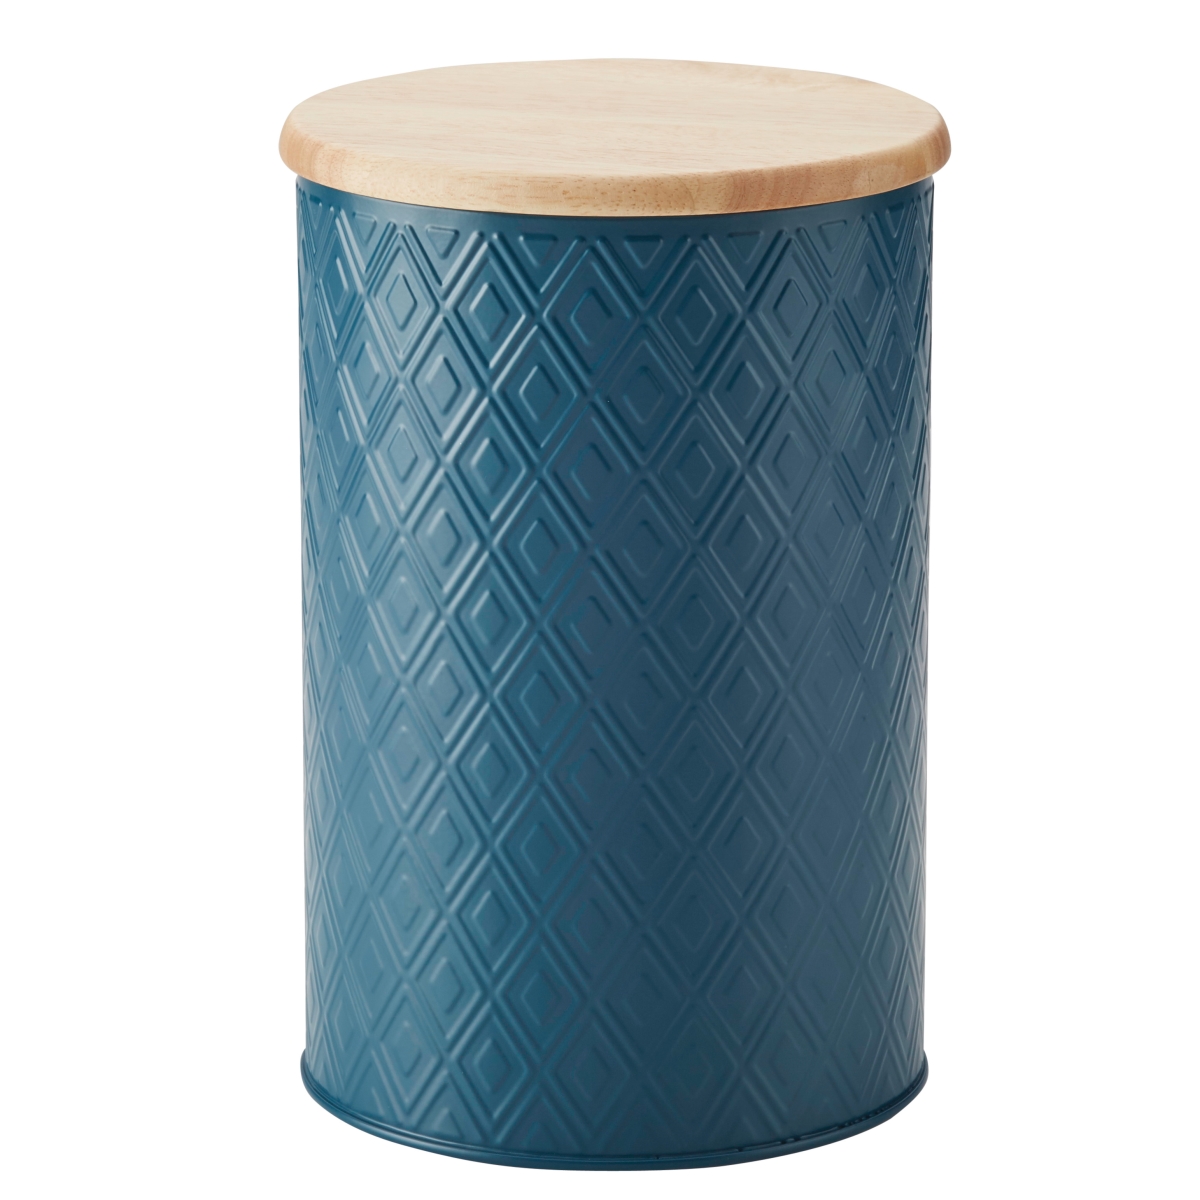 47532 Large Storage Canister, 16 Piece - Twilight Teal